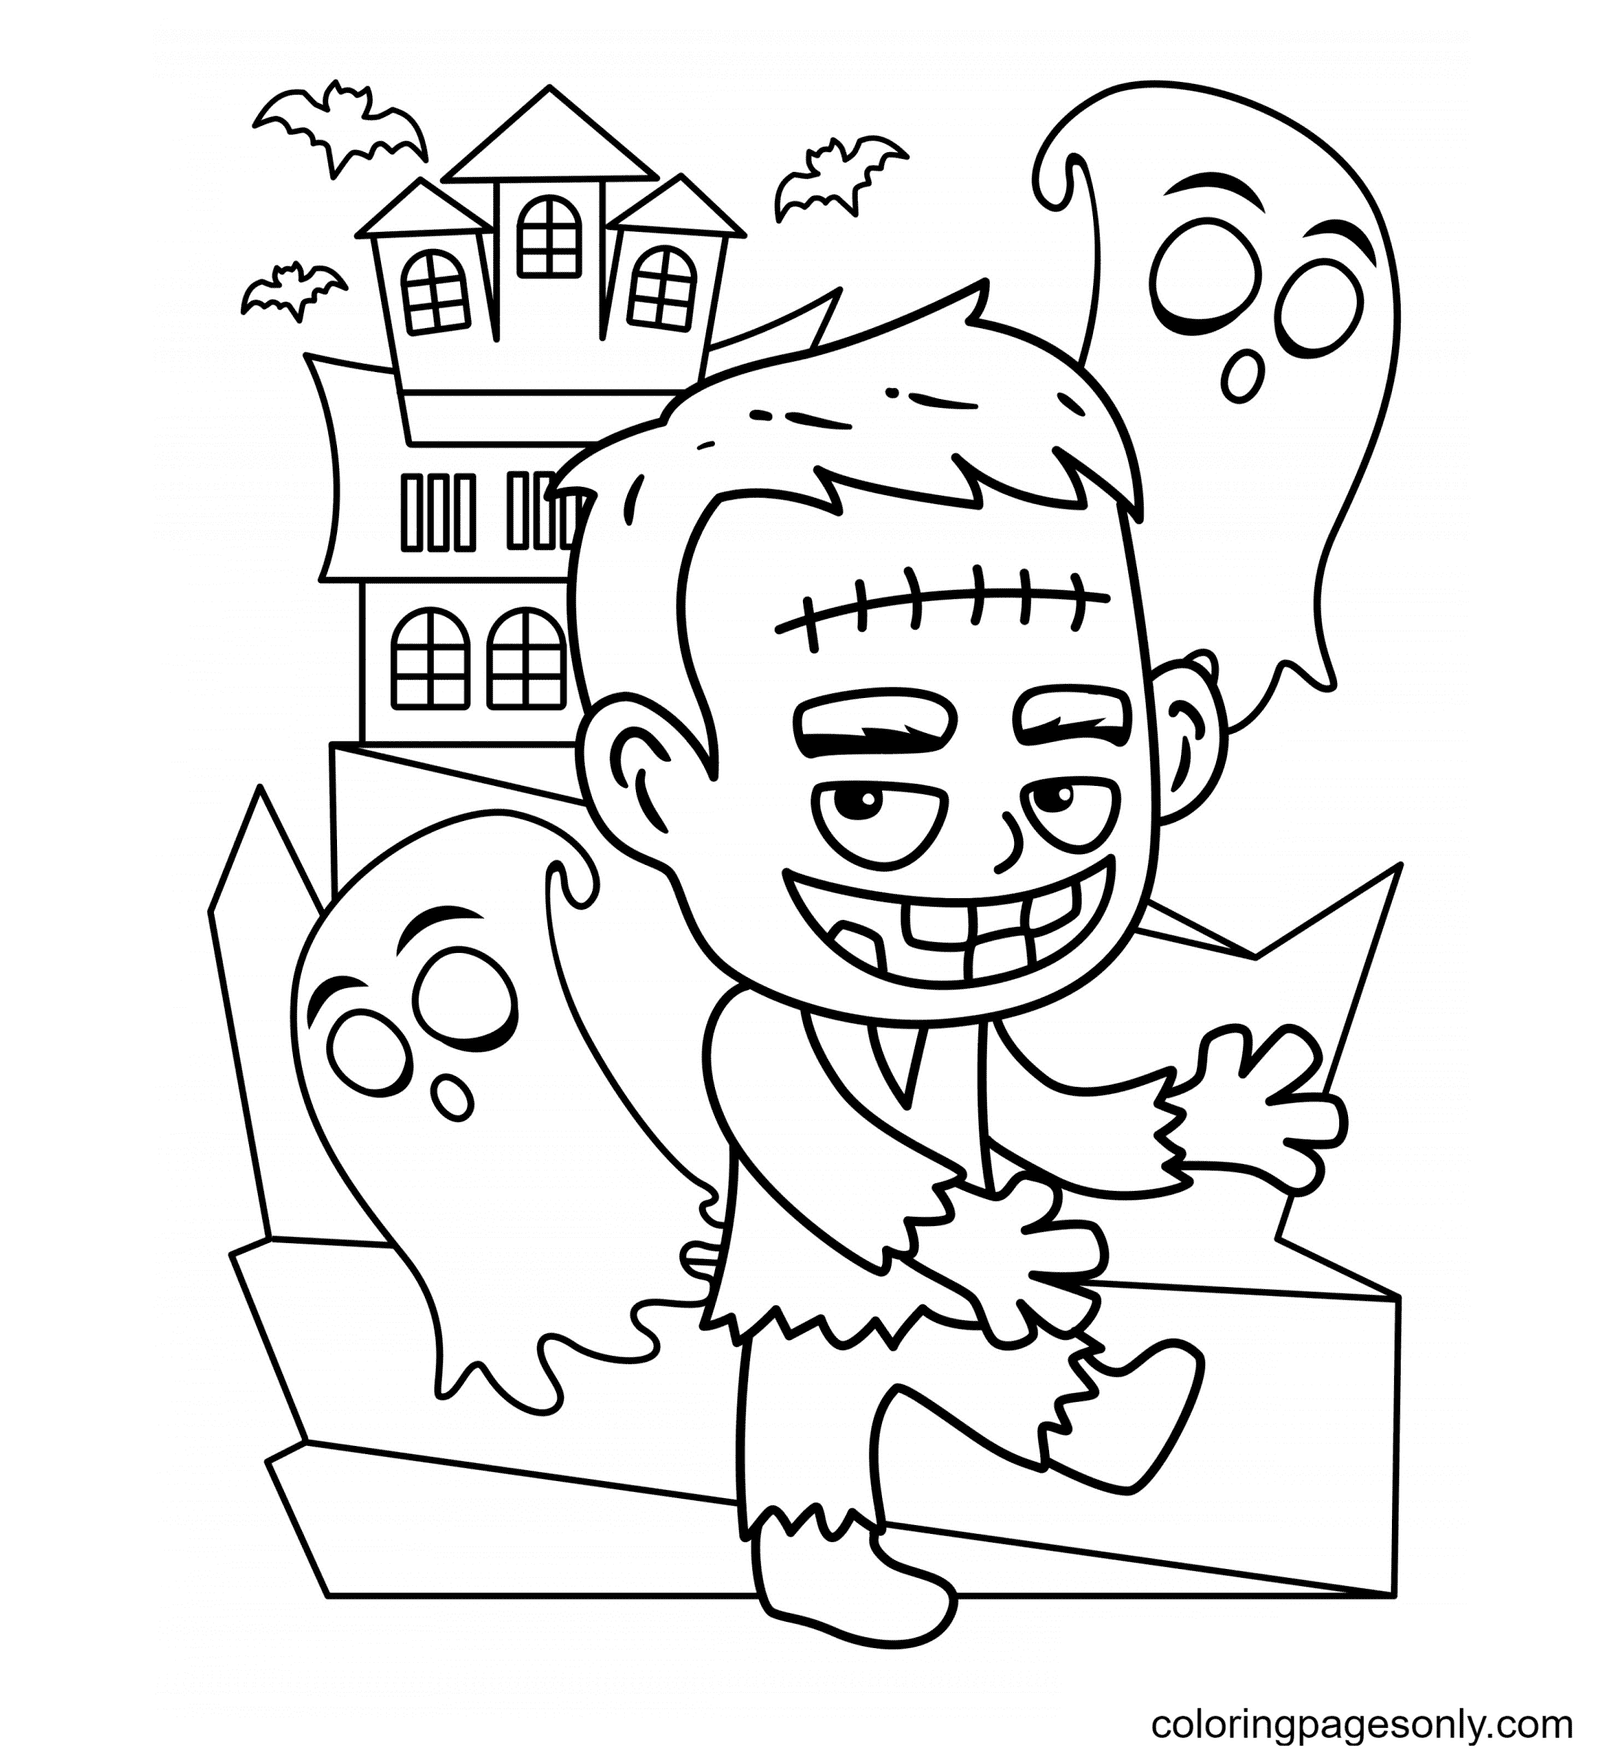 Halloween monsters coloring pages printable for free download